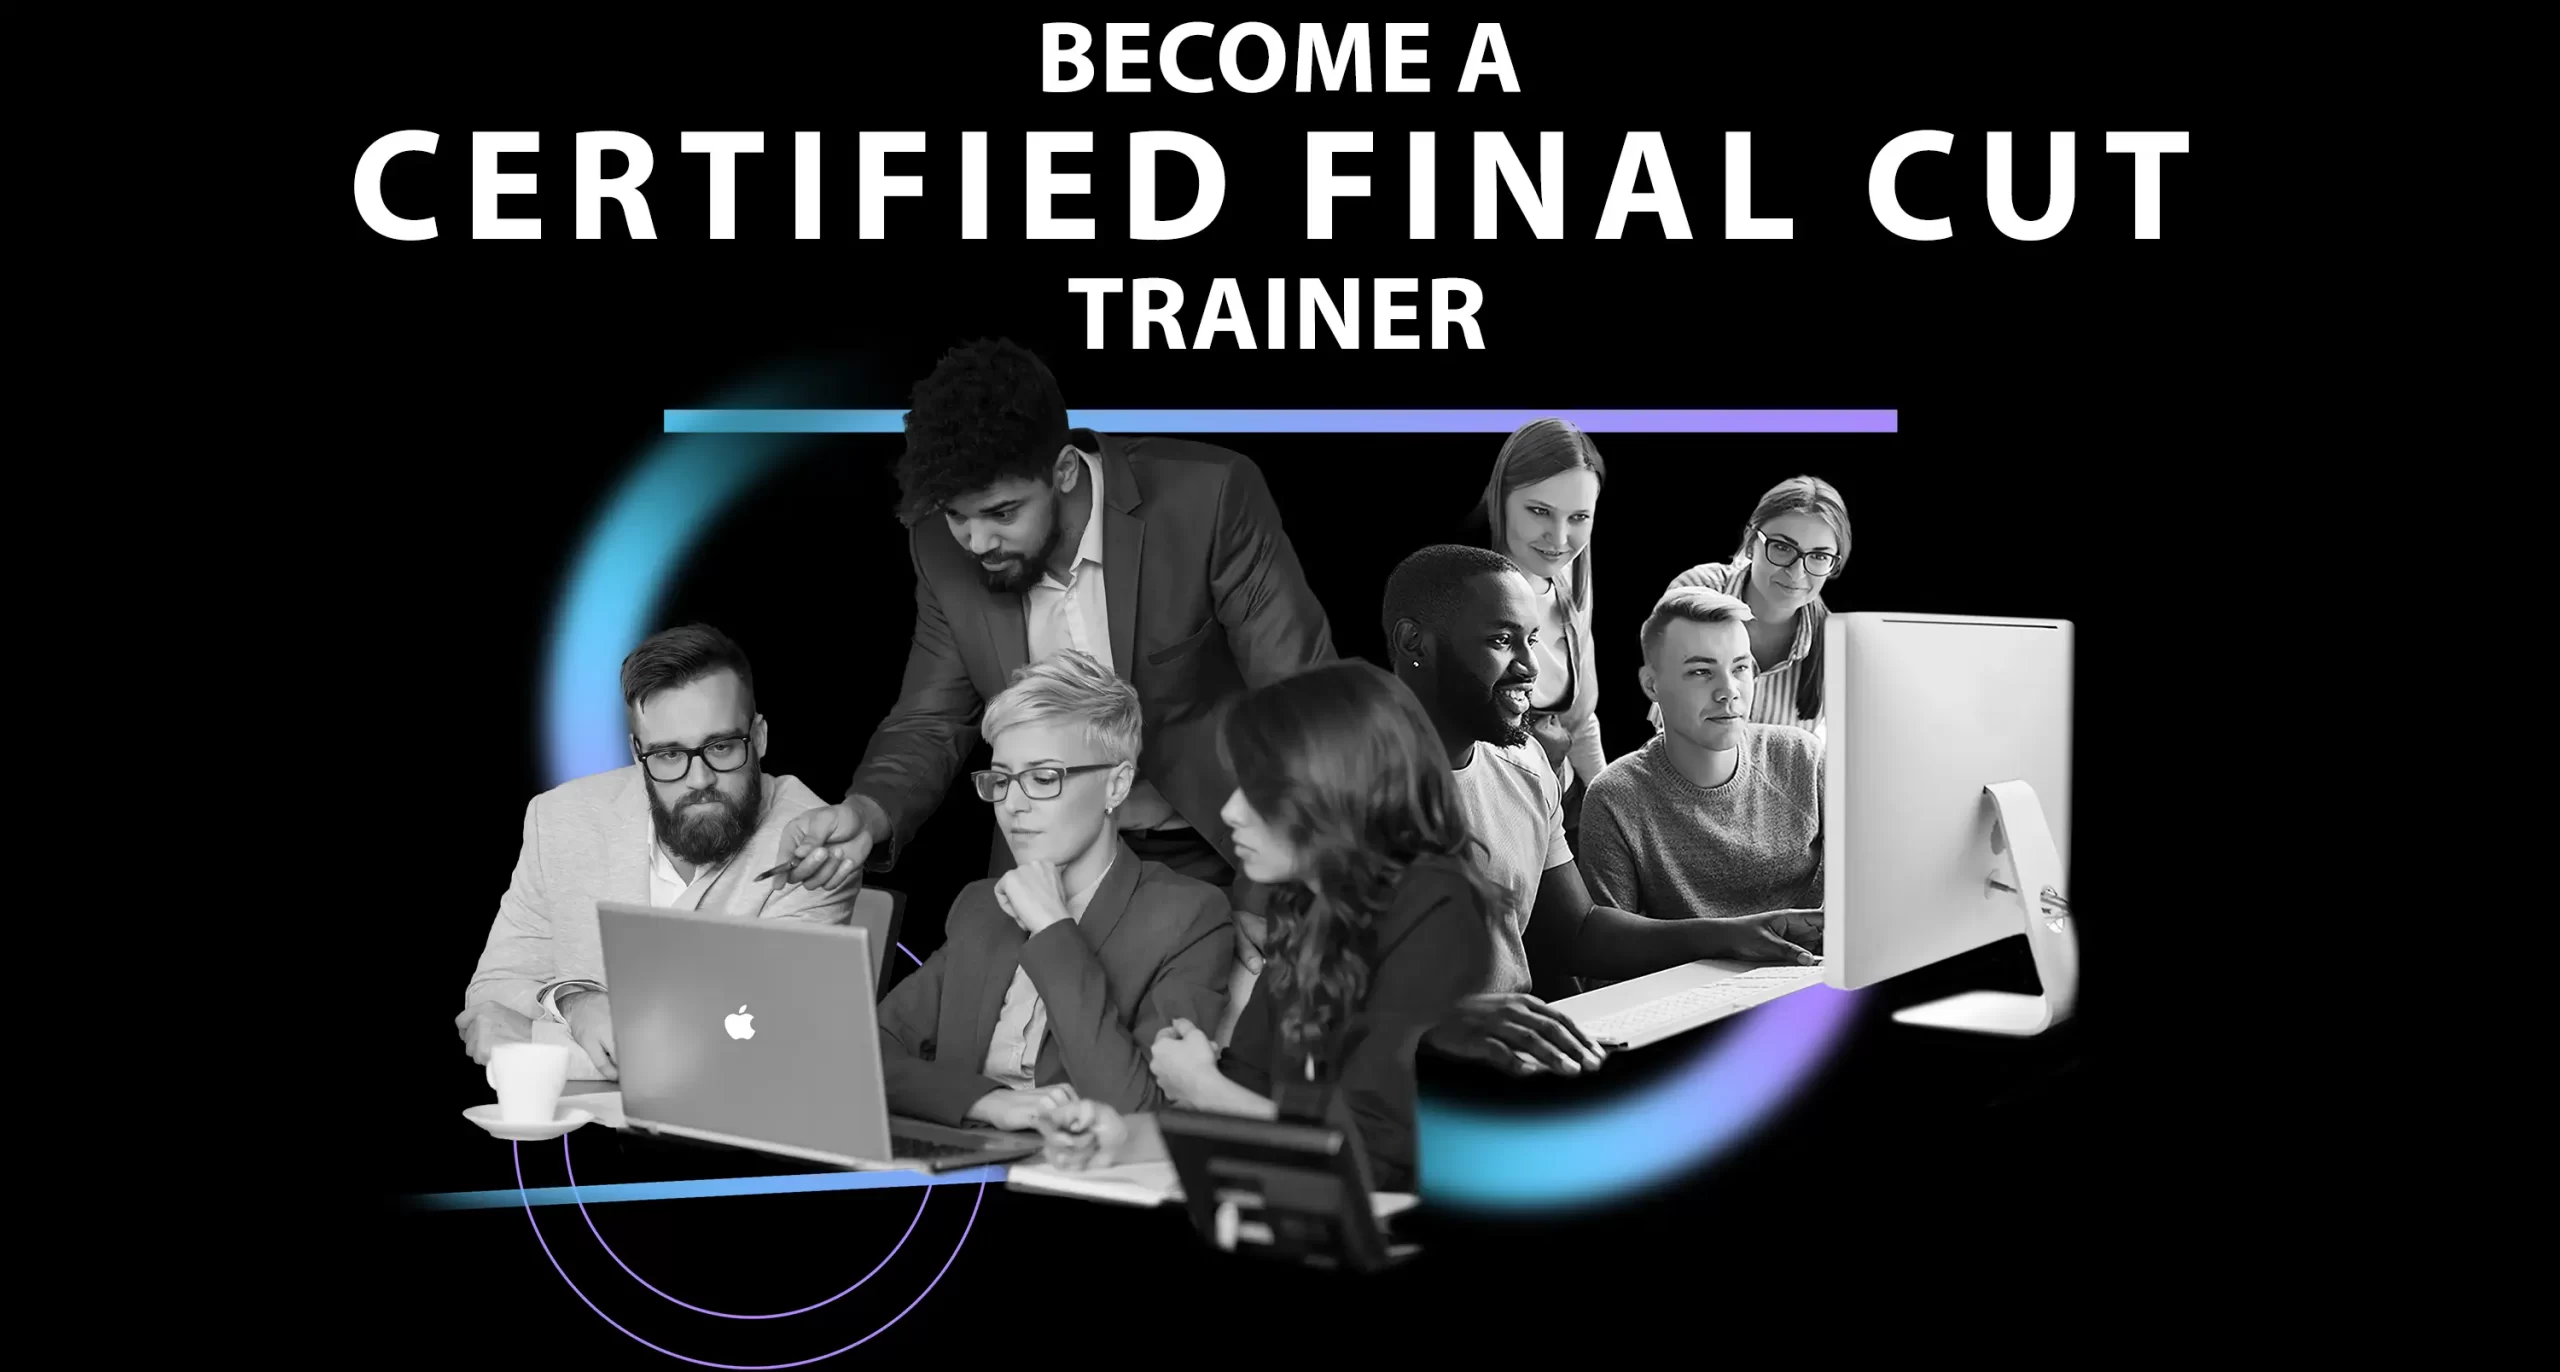 Become a Certified Final Cut Trainer - image collage